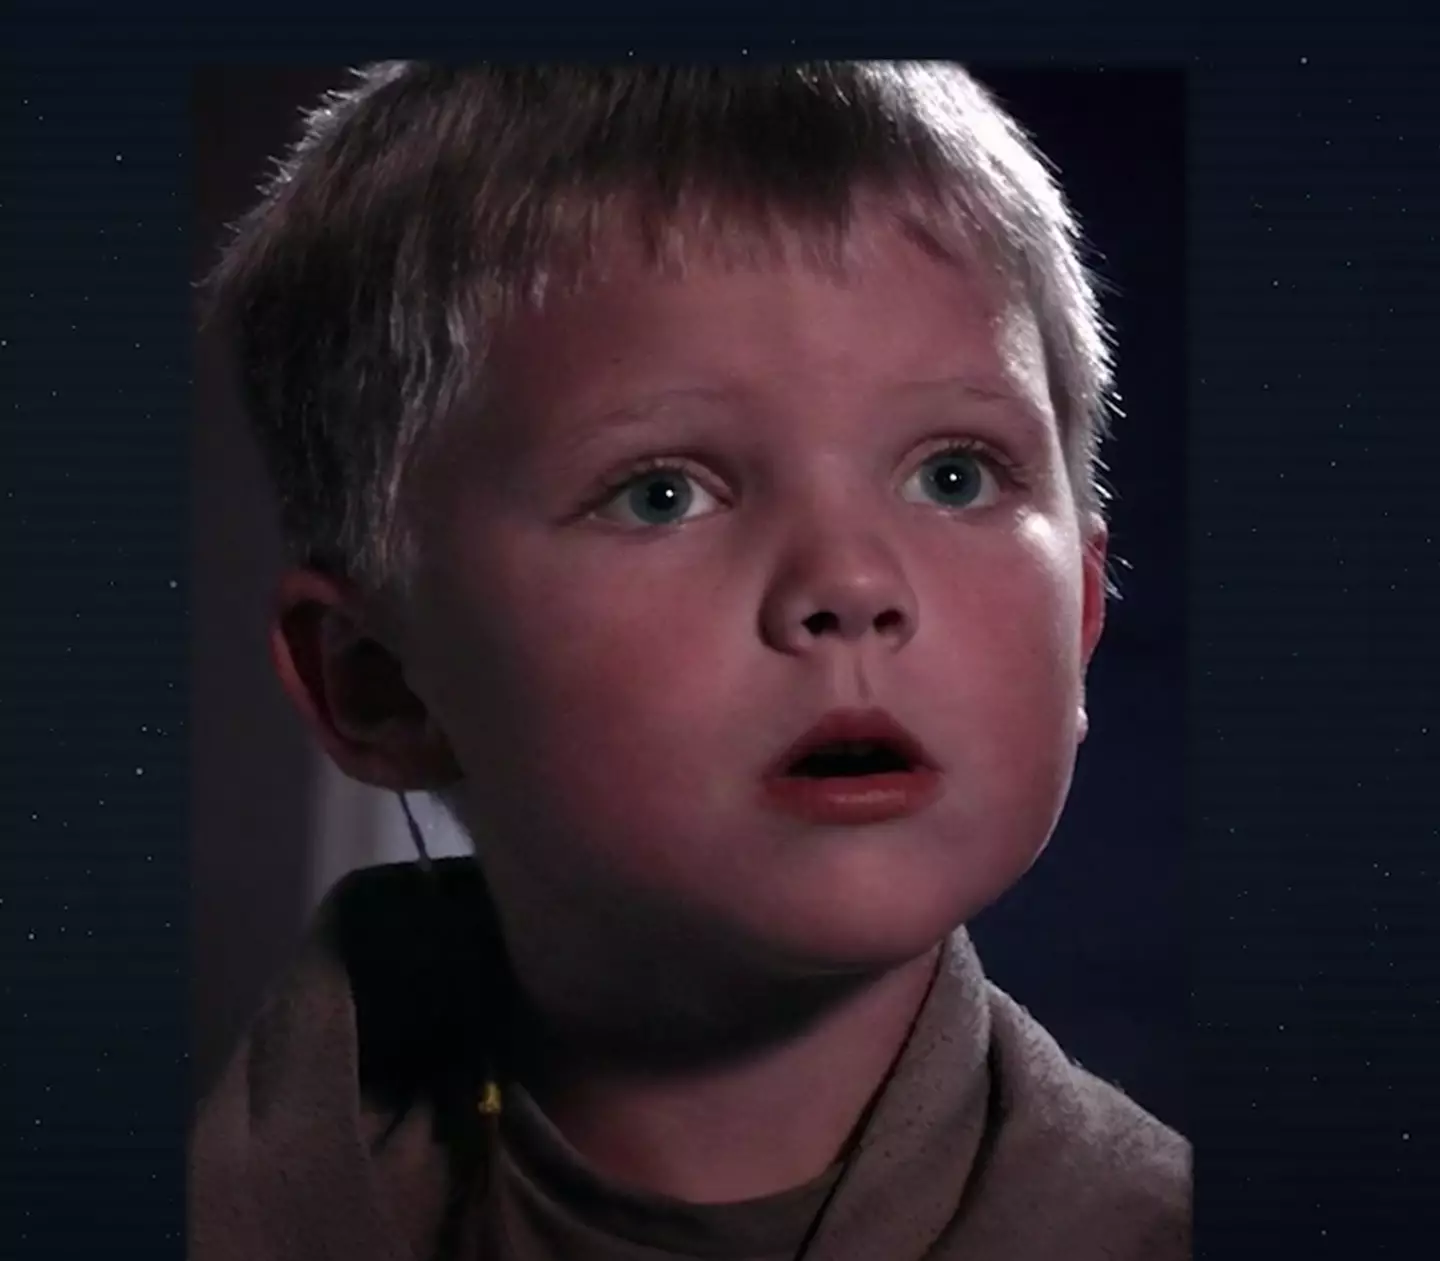 Ross was only six years old when he starred in Revenge of the Sith.